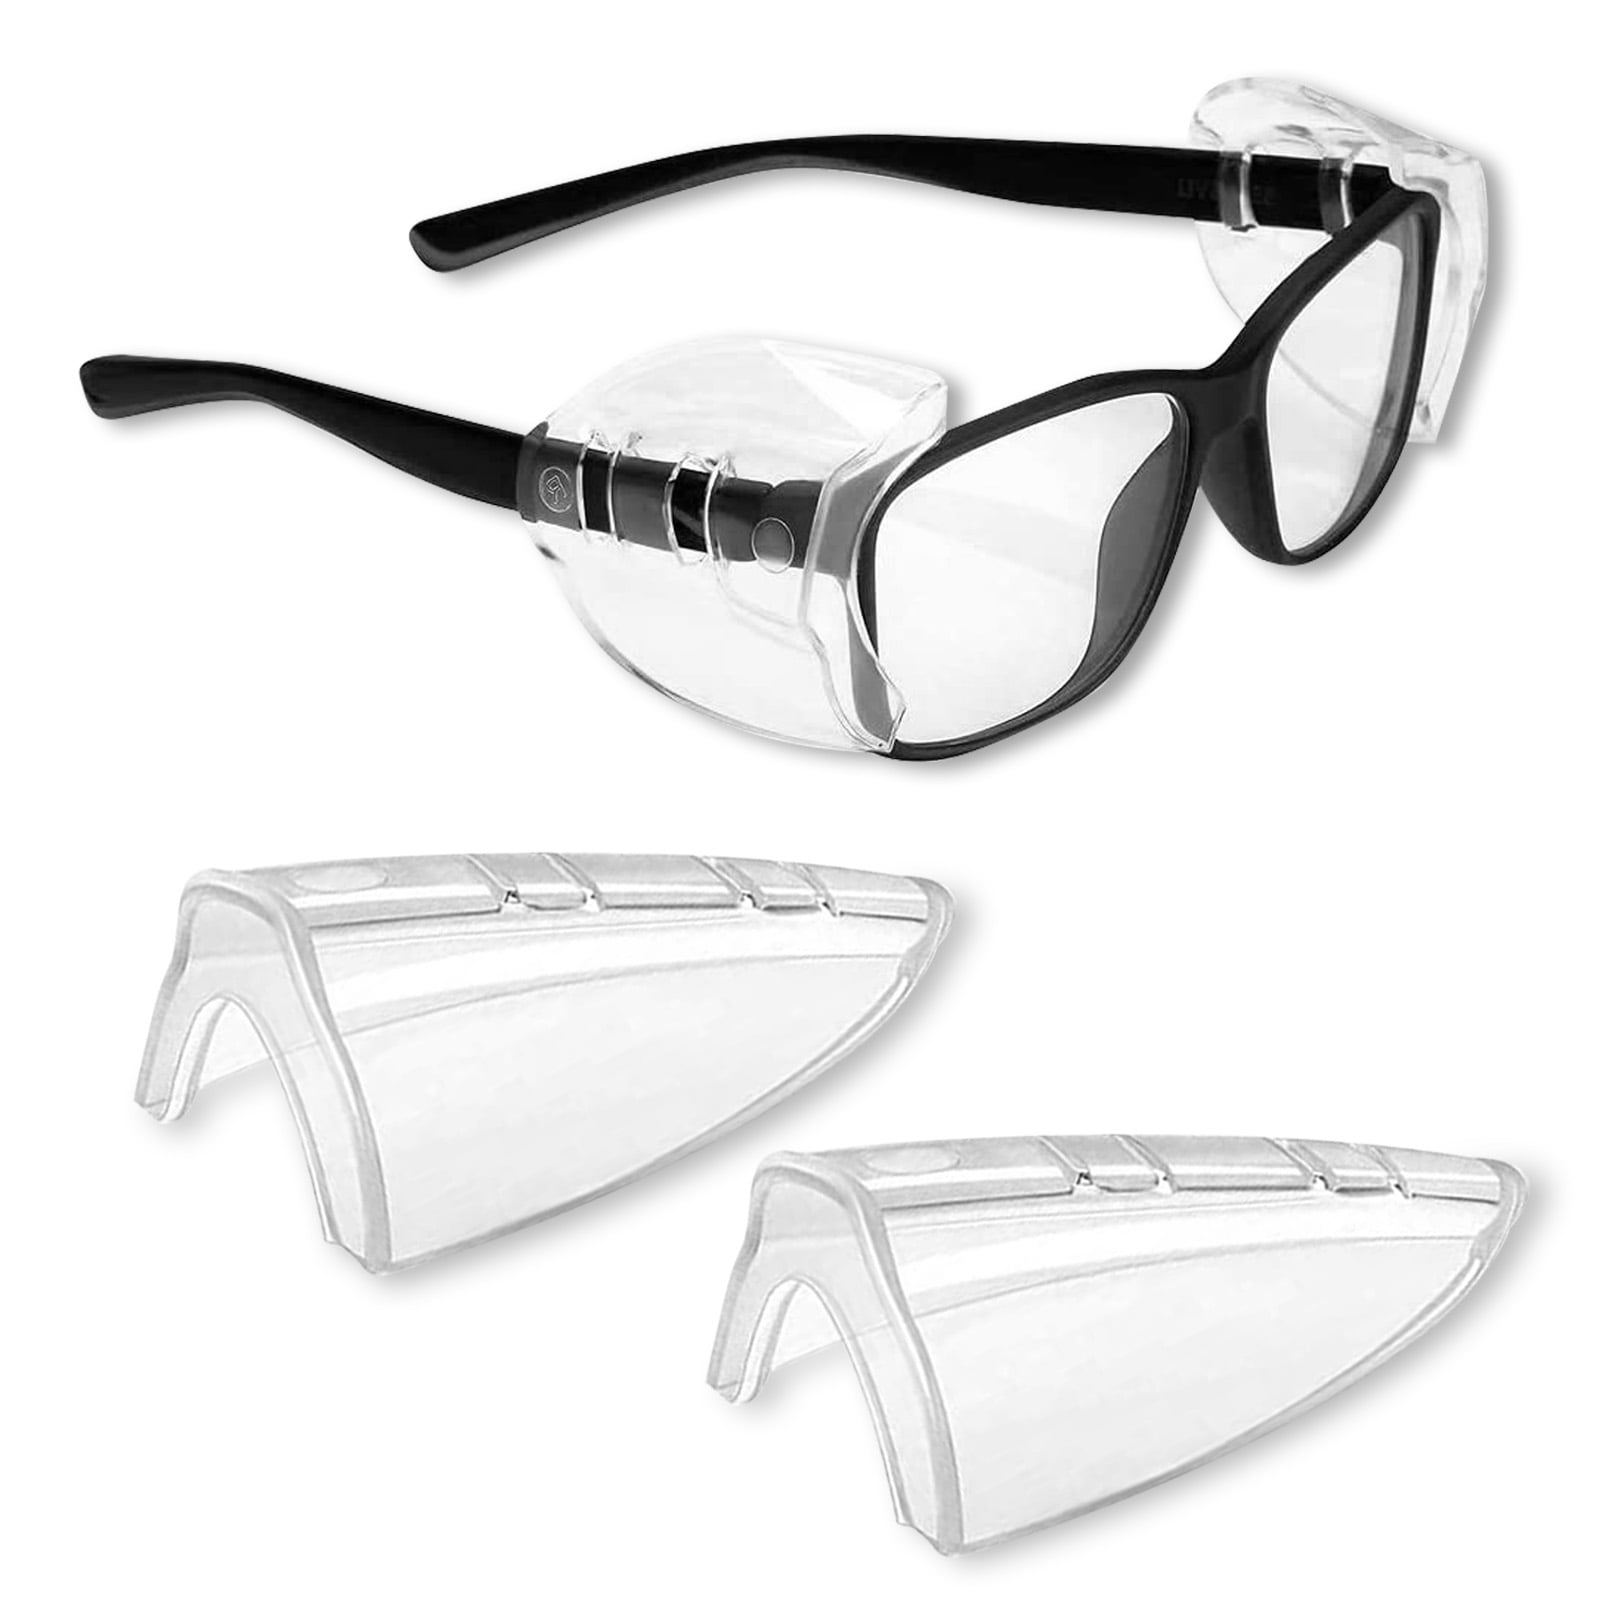 Anti-Fog/ scratch lens .Free neck Cord Safety Glasses Side Shields Clear 